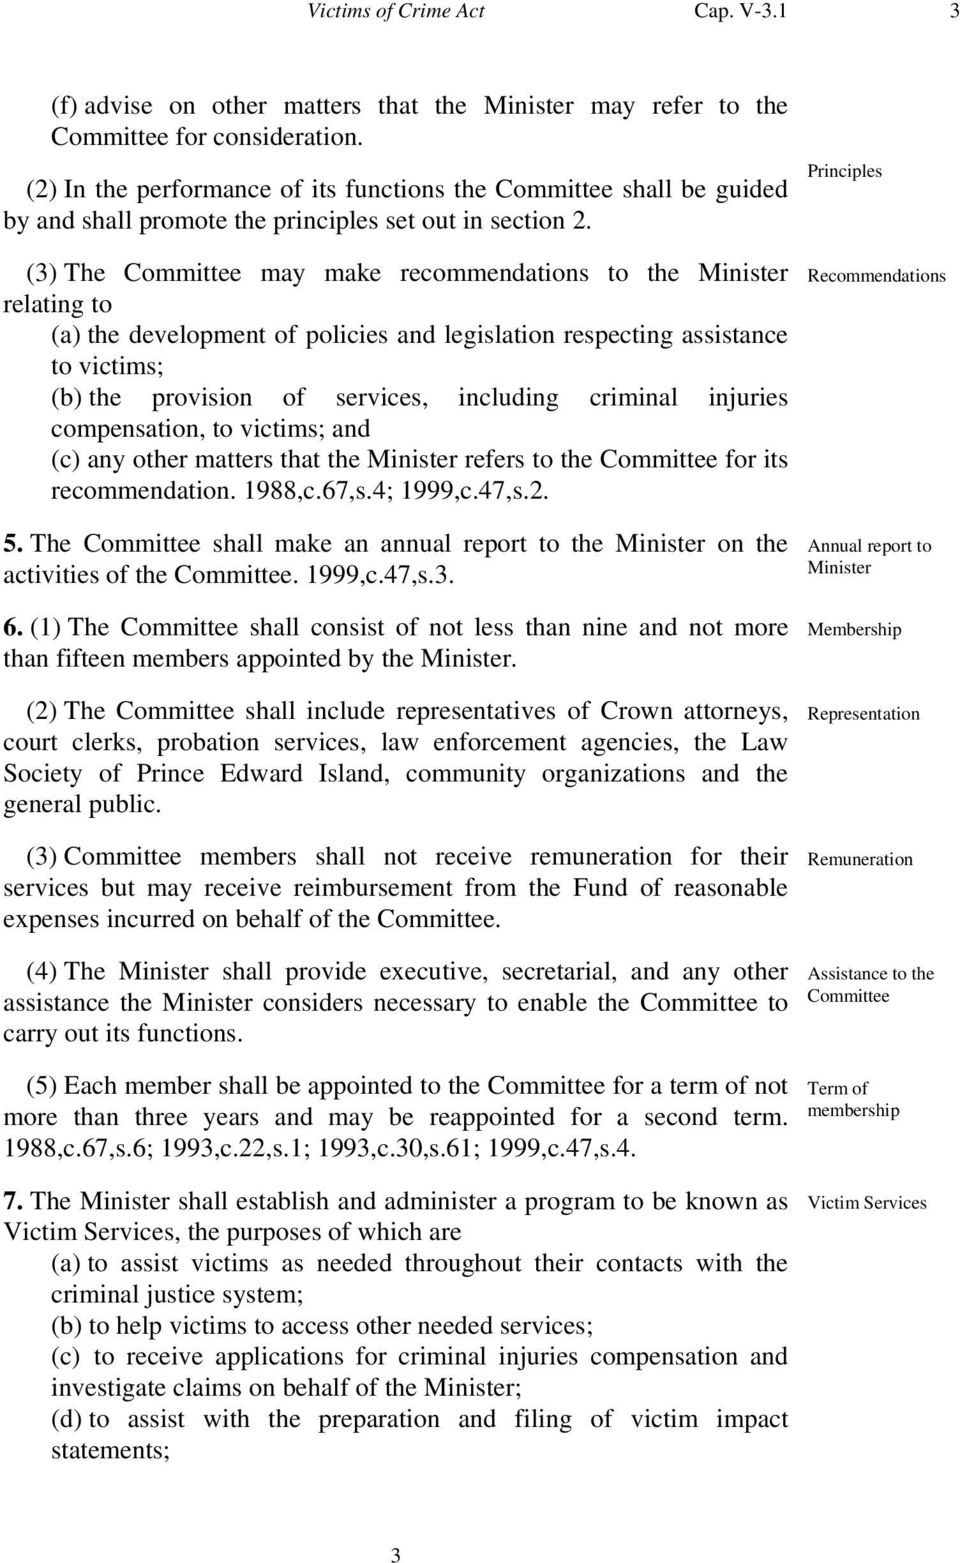 (3) The Committee may make recommendations to the Minister relating to (a) the development of policies and legislation respecting assistance to victims; (b) the provision of services, including